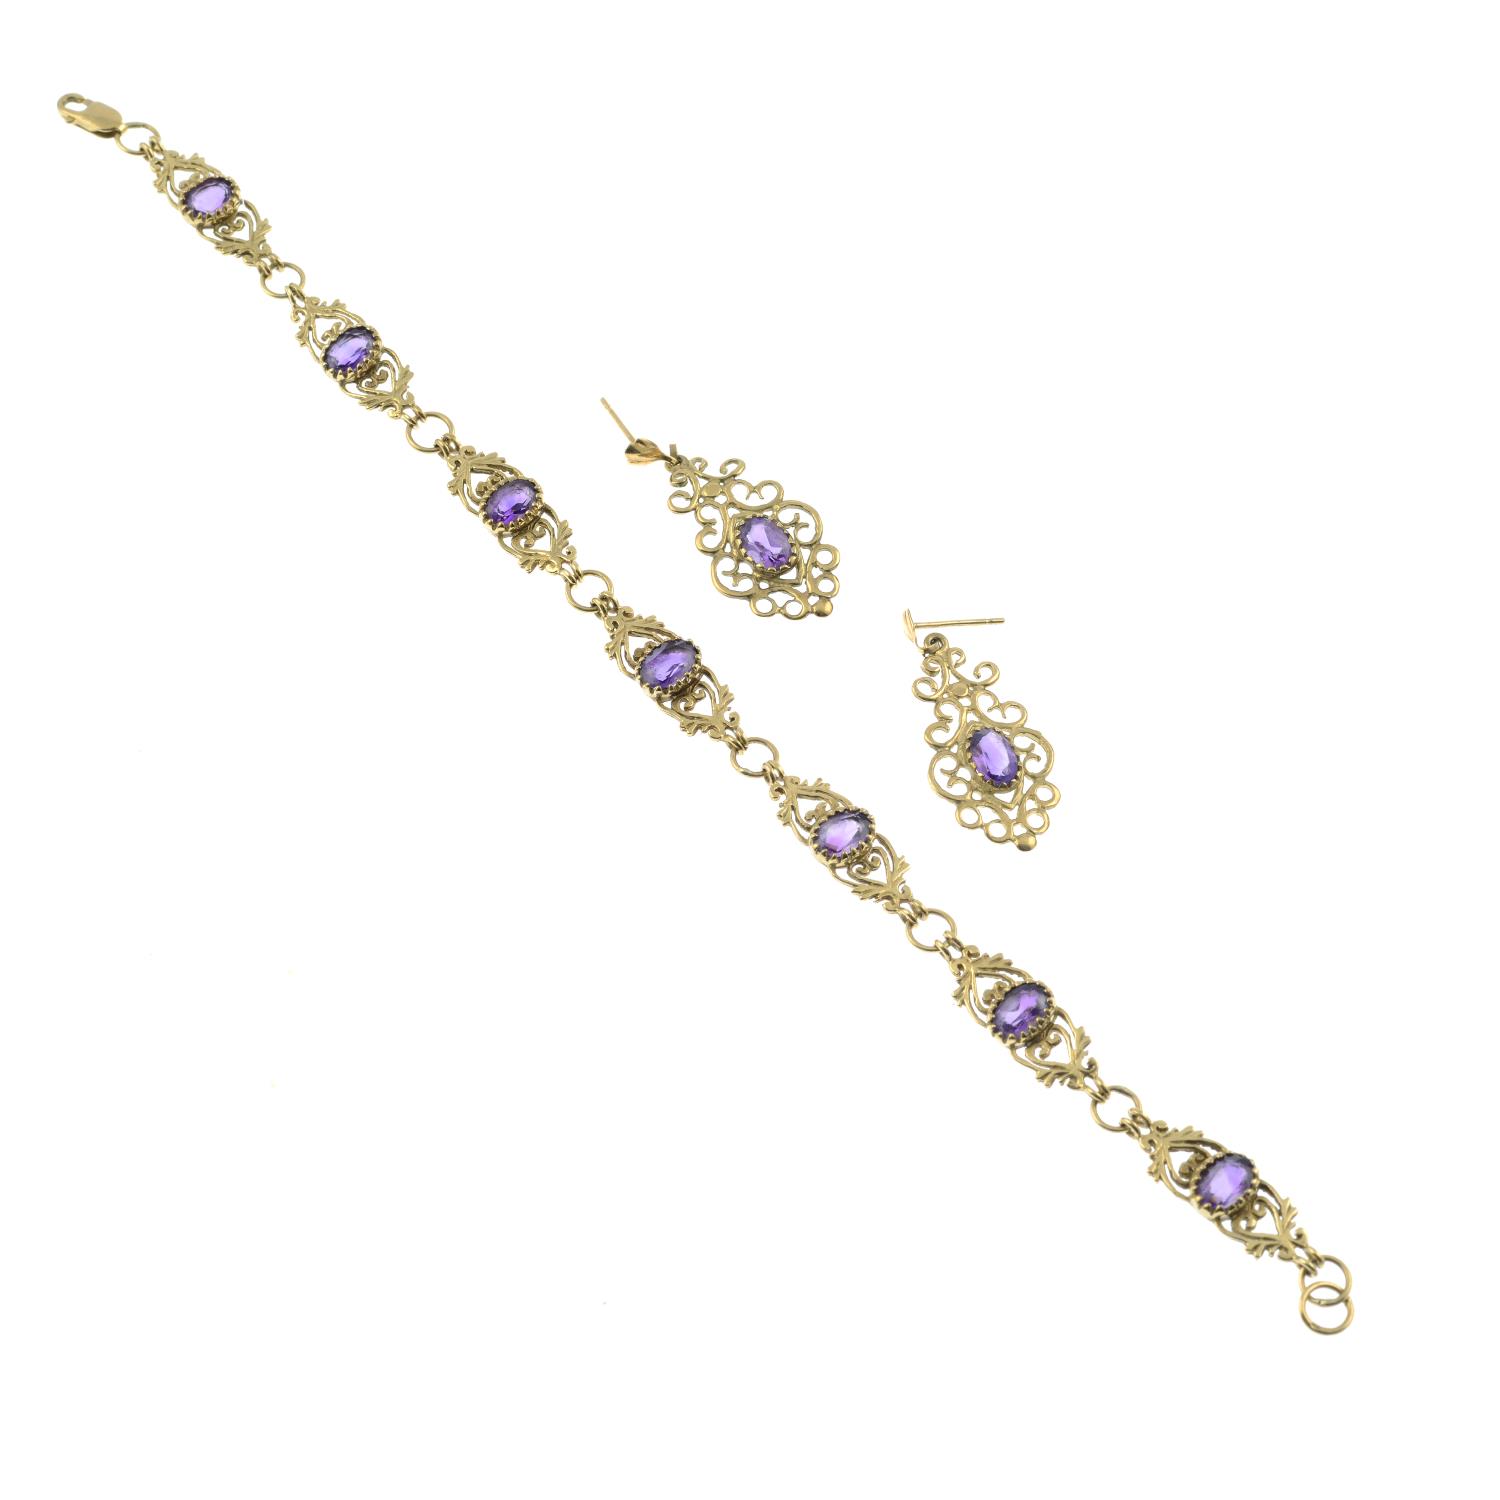 A amethyst bracelet with a pair of 9ct gold amethyst earrings.One with Hallmarks for Birmingham. - Image 2 of 3